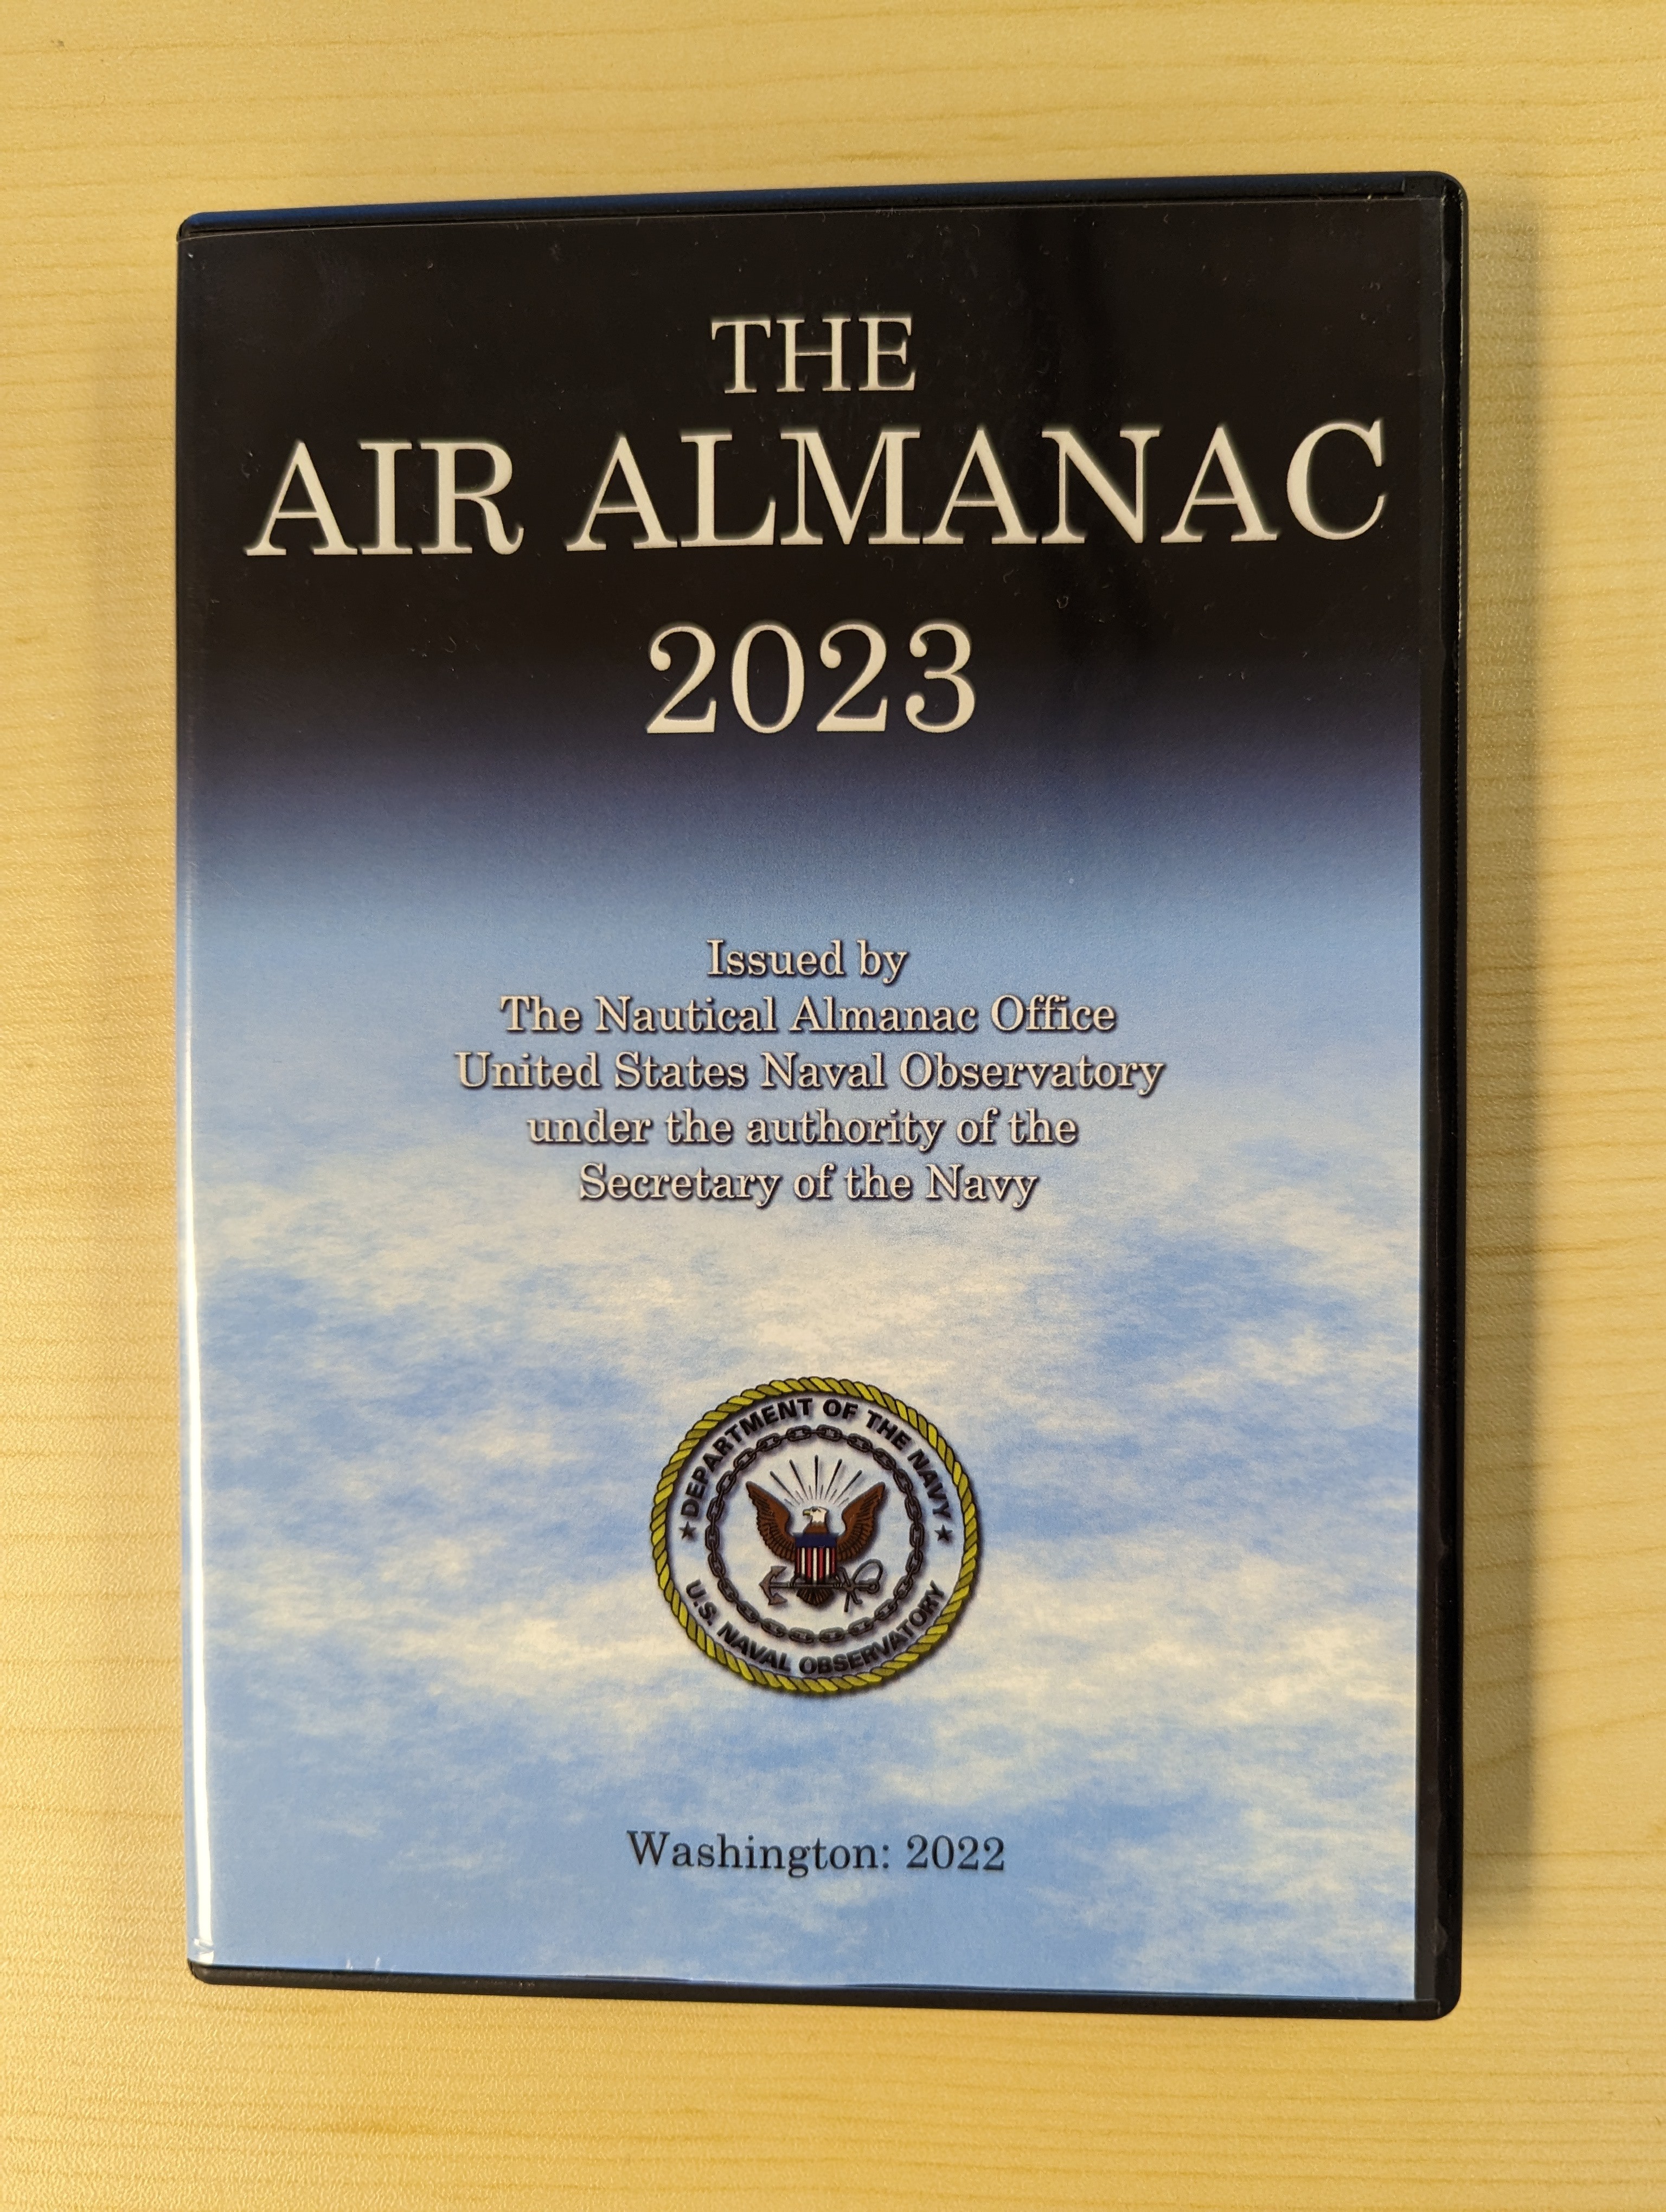 Picture of the 2023 Air Almanac box and CD